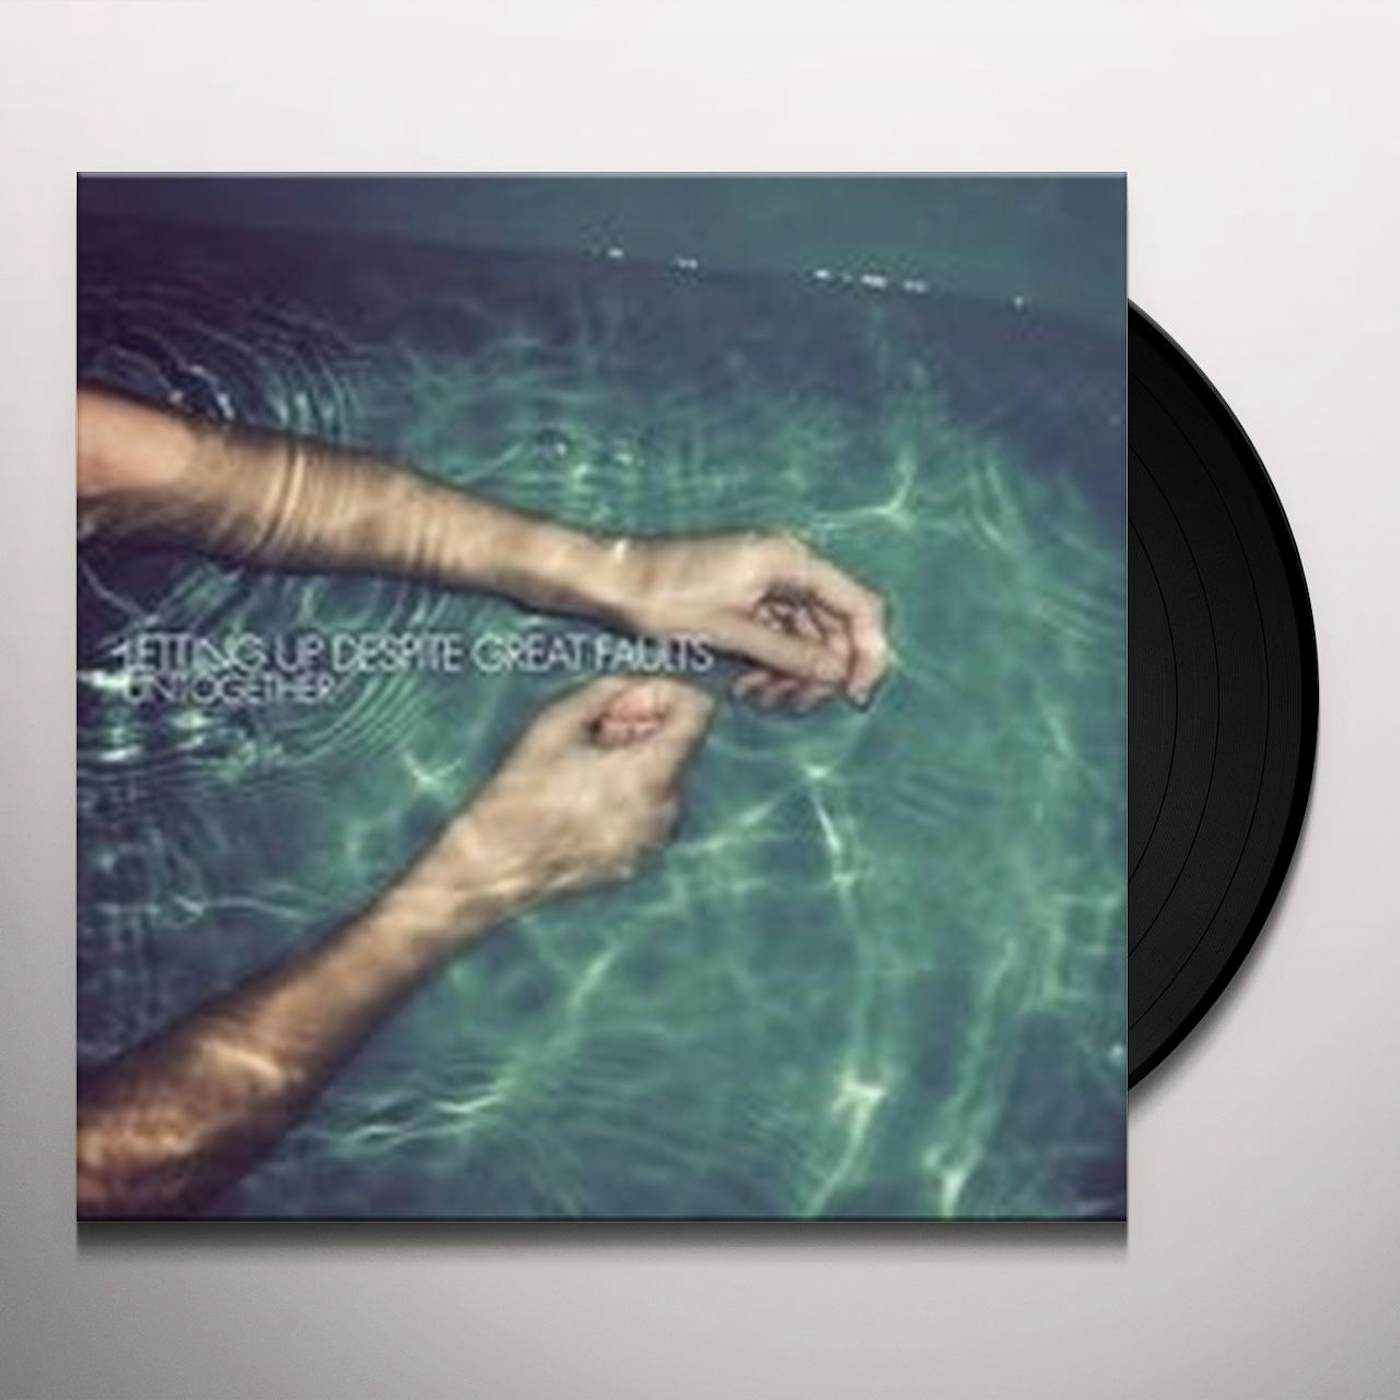 Letting Up Despite Great Faults Untogether Vinyl Record